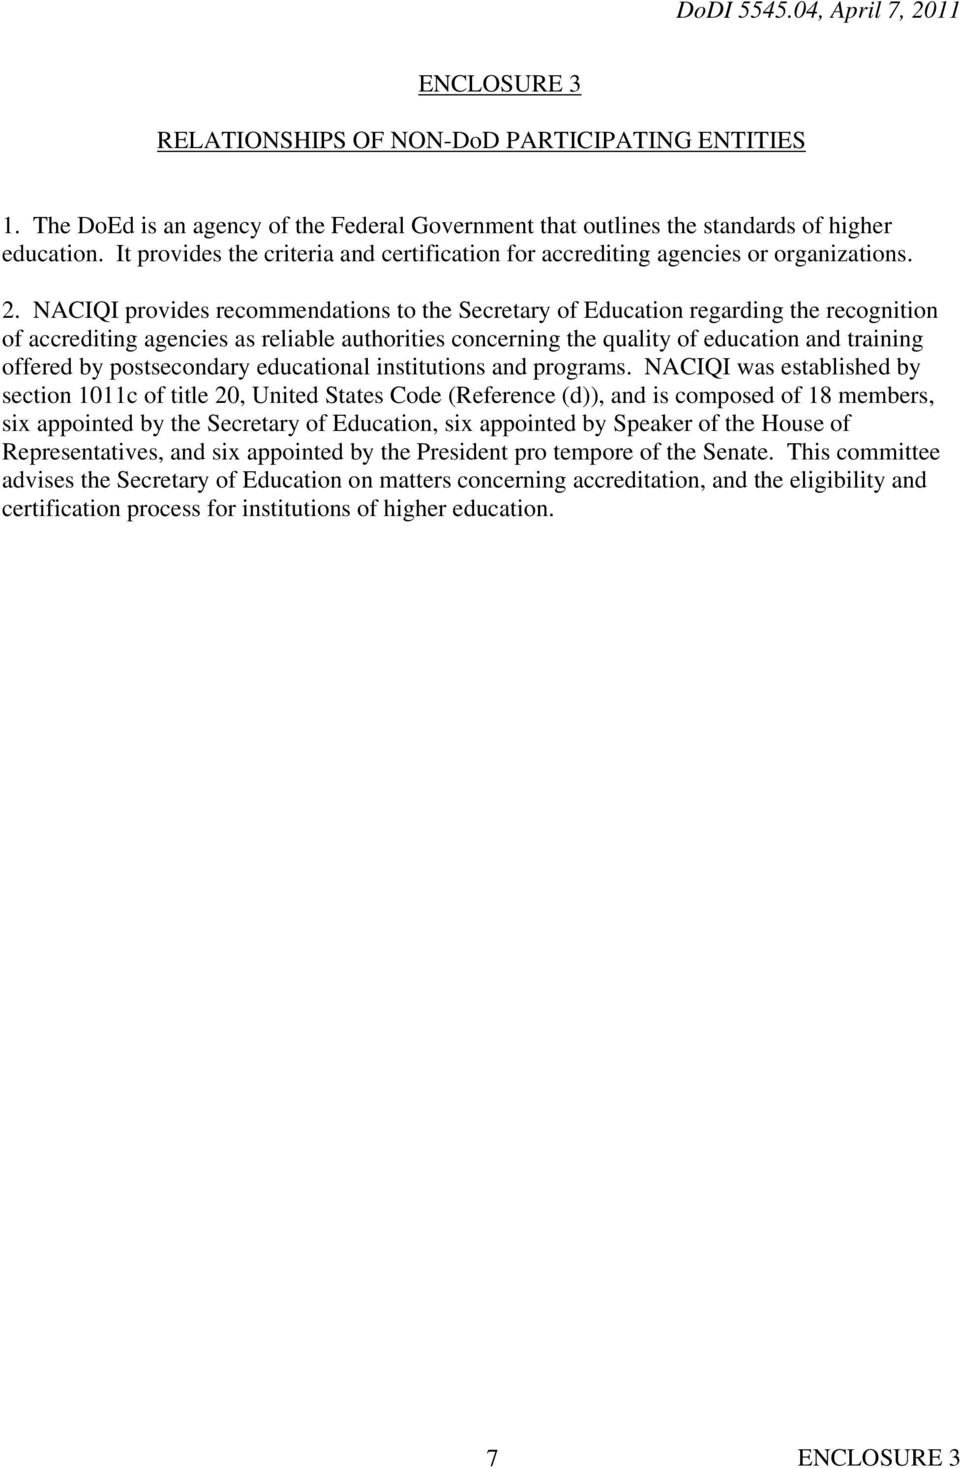 NACIQI provides recommendations to the Secretary of Education regarding the recognition of accrediting agencies as reliable authorities concerning the quality of education and training offered by